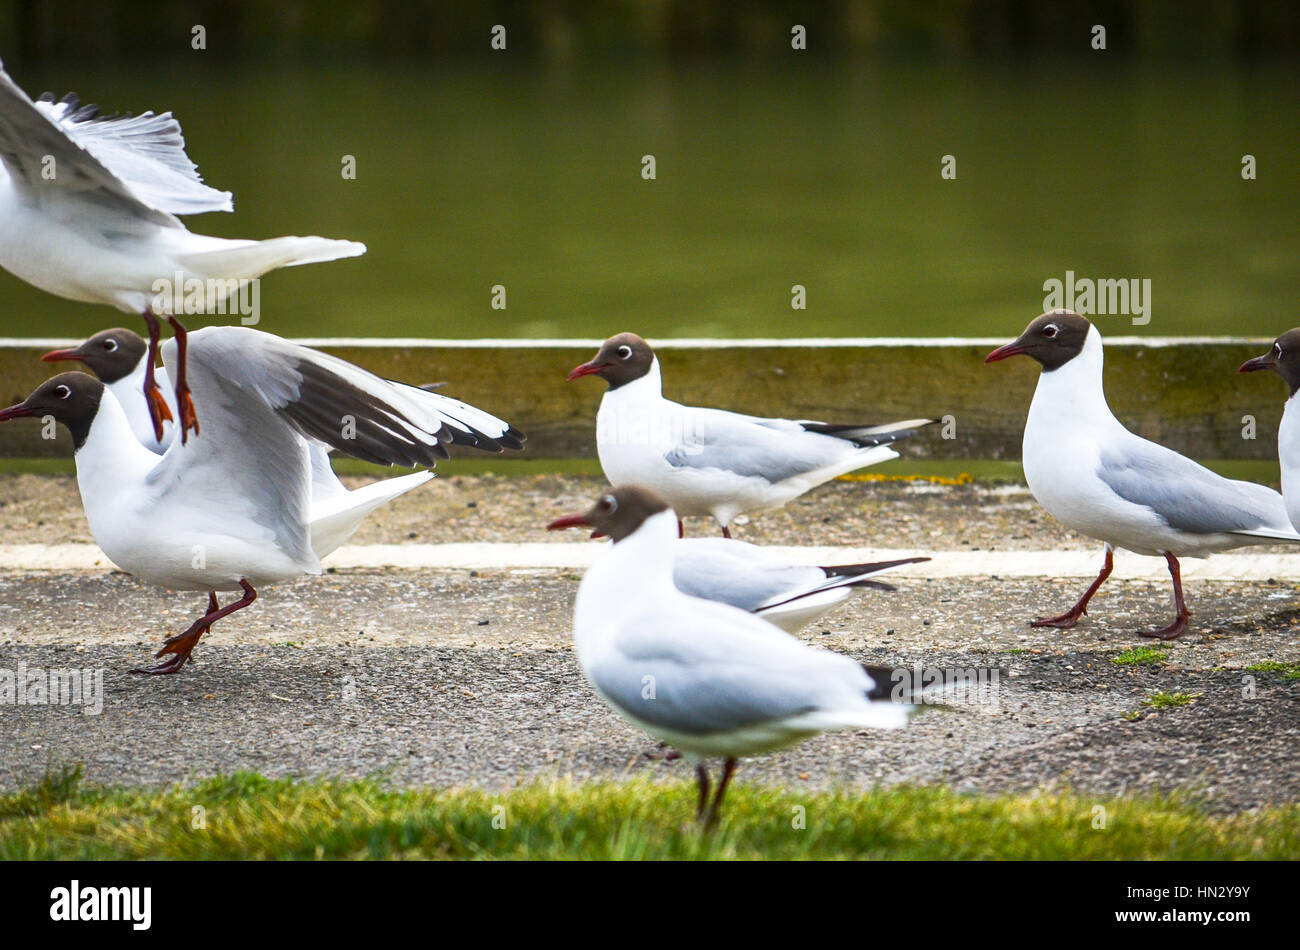 Seagulls on patrol by a path in a park Stock Photo